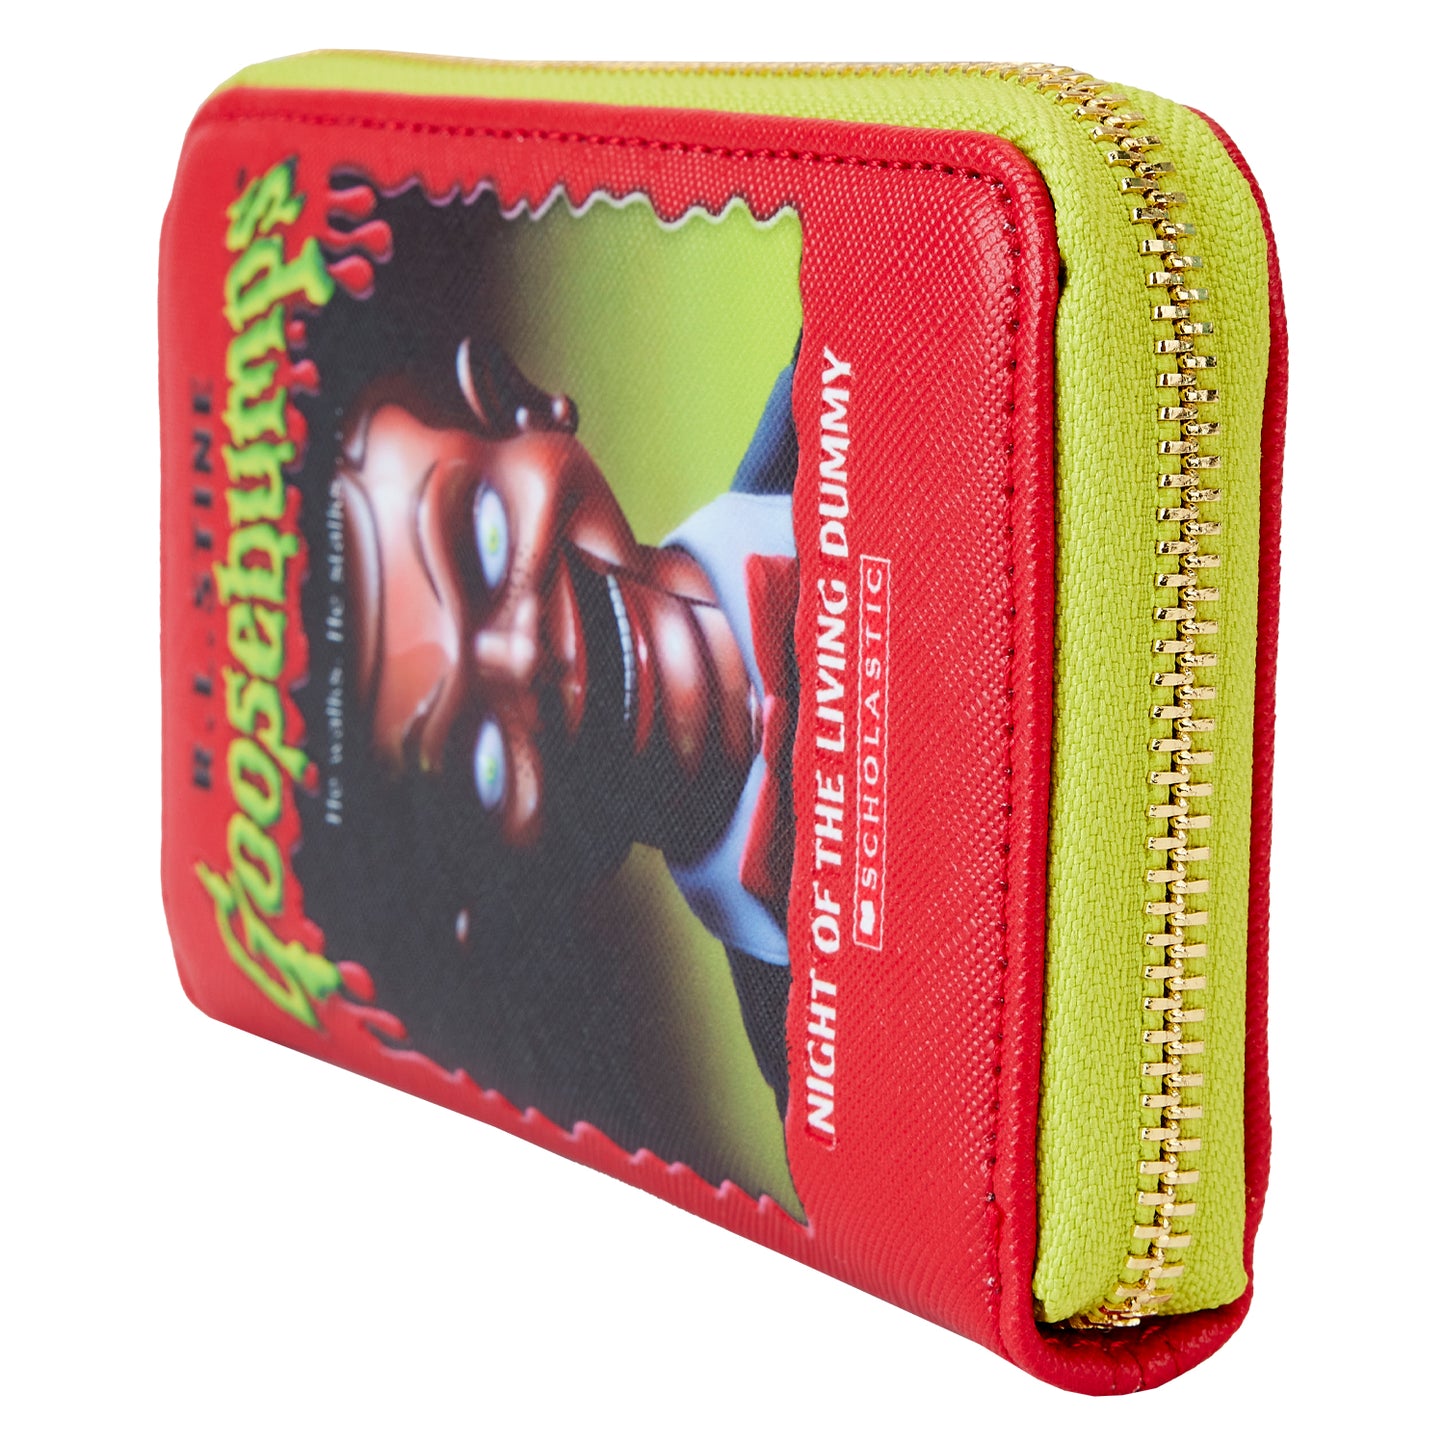 Loungefly Sony Goosebumps Book Cover Zip-Around Wallet *PRE-ORDER ITEM*